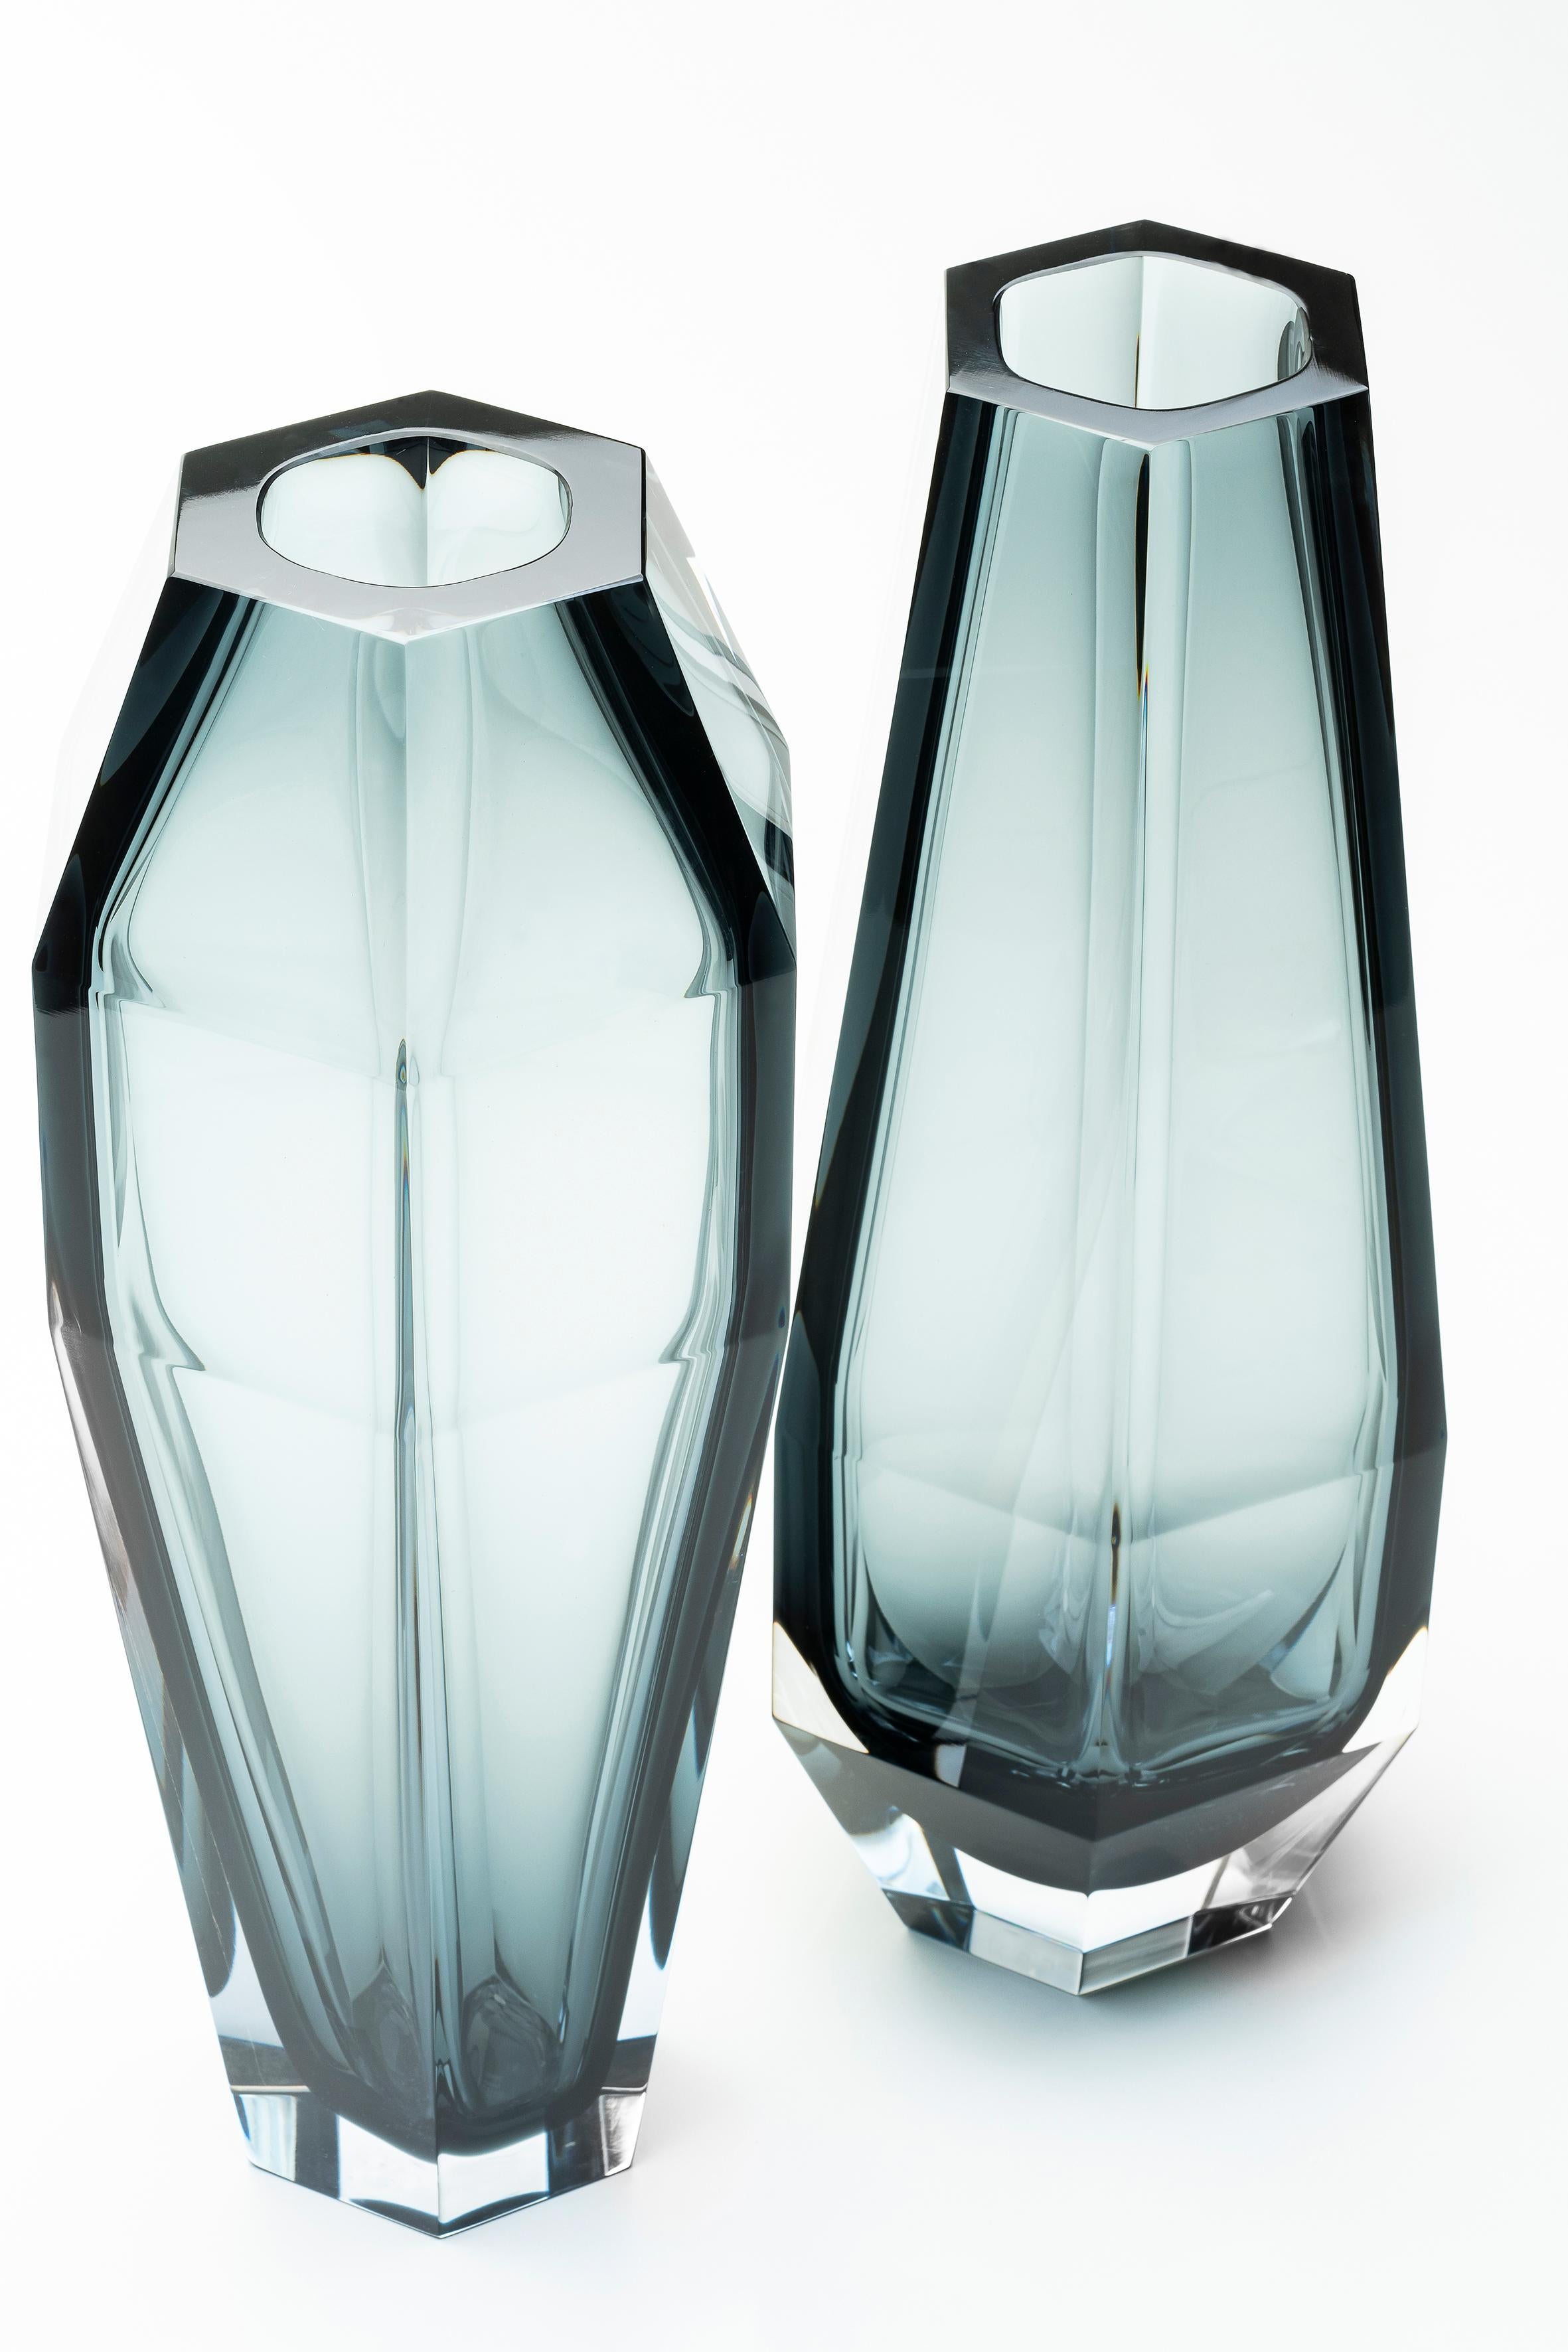 Set of 2 Gemello and Gemella vases by Purho
Dimensions: D15x H40 cm each
Materials: Glass
Other colours,finishes and dimensions are available.

Purho is a new protagonist of made in Italy design , a work of synthesis, a research that has lasted